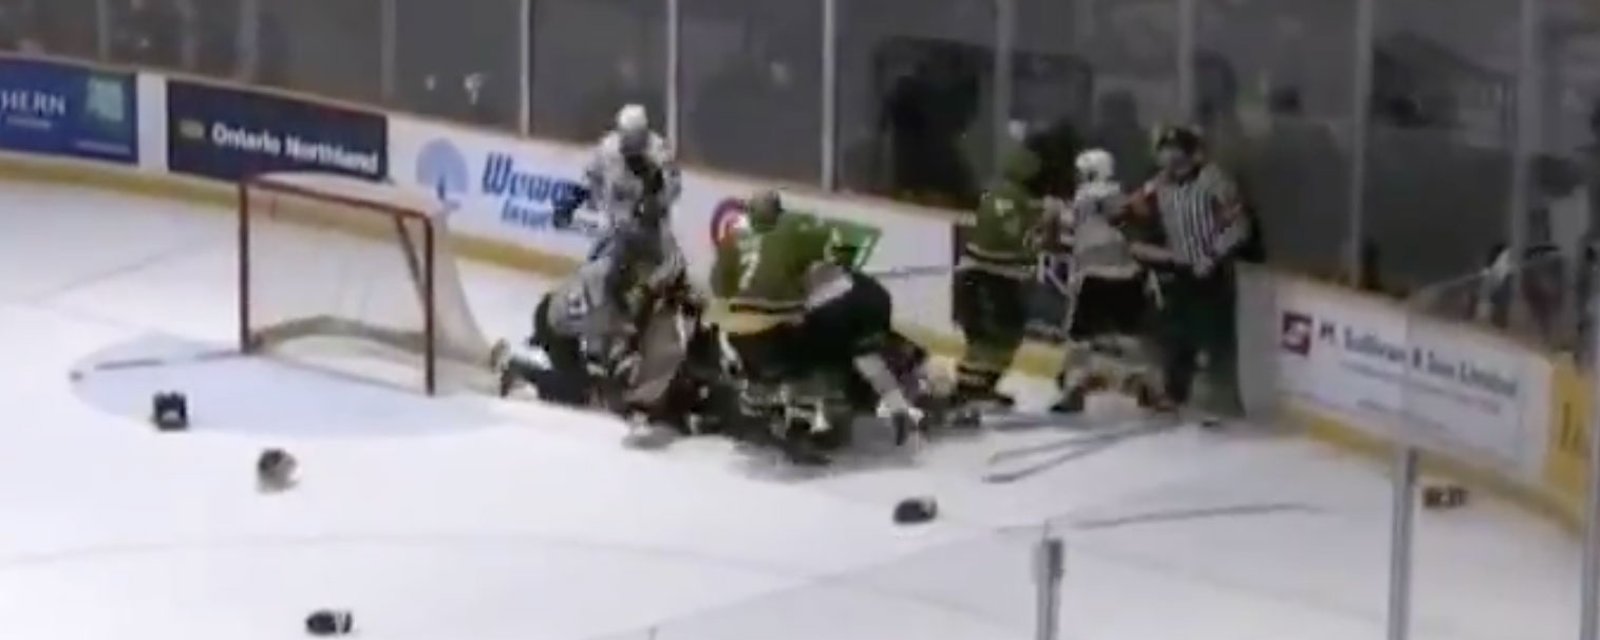 Massive line brawl erupts after player attacks goalie in his net! 